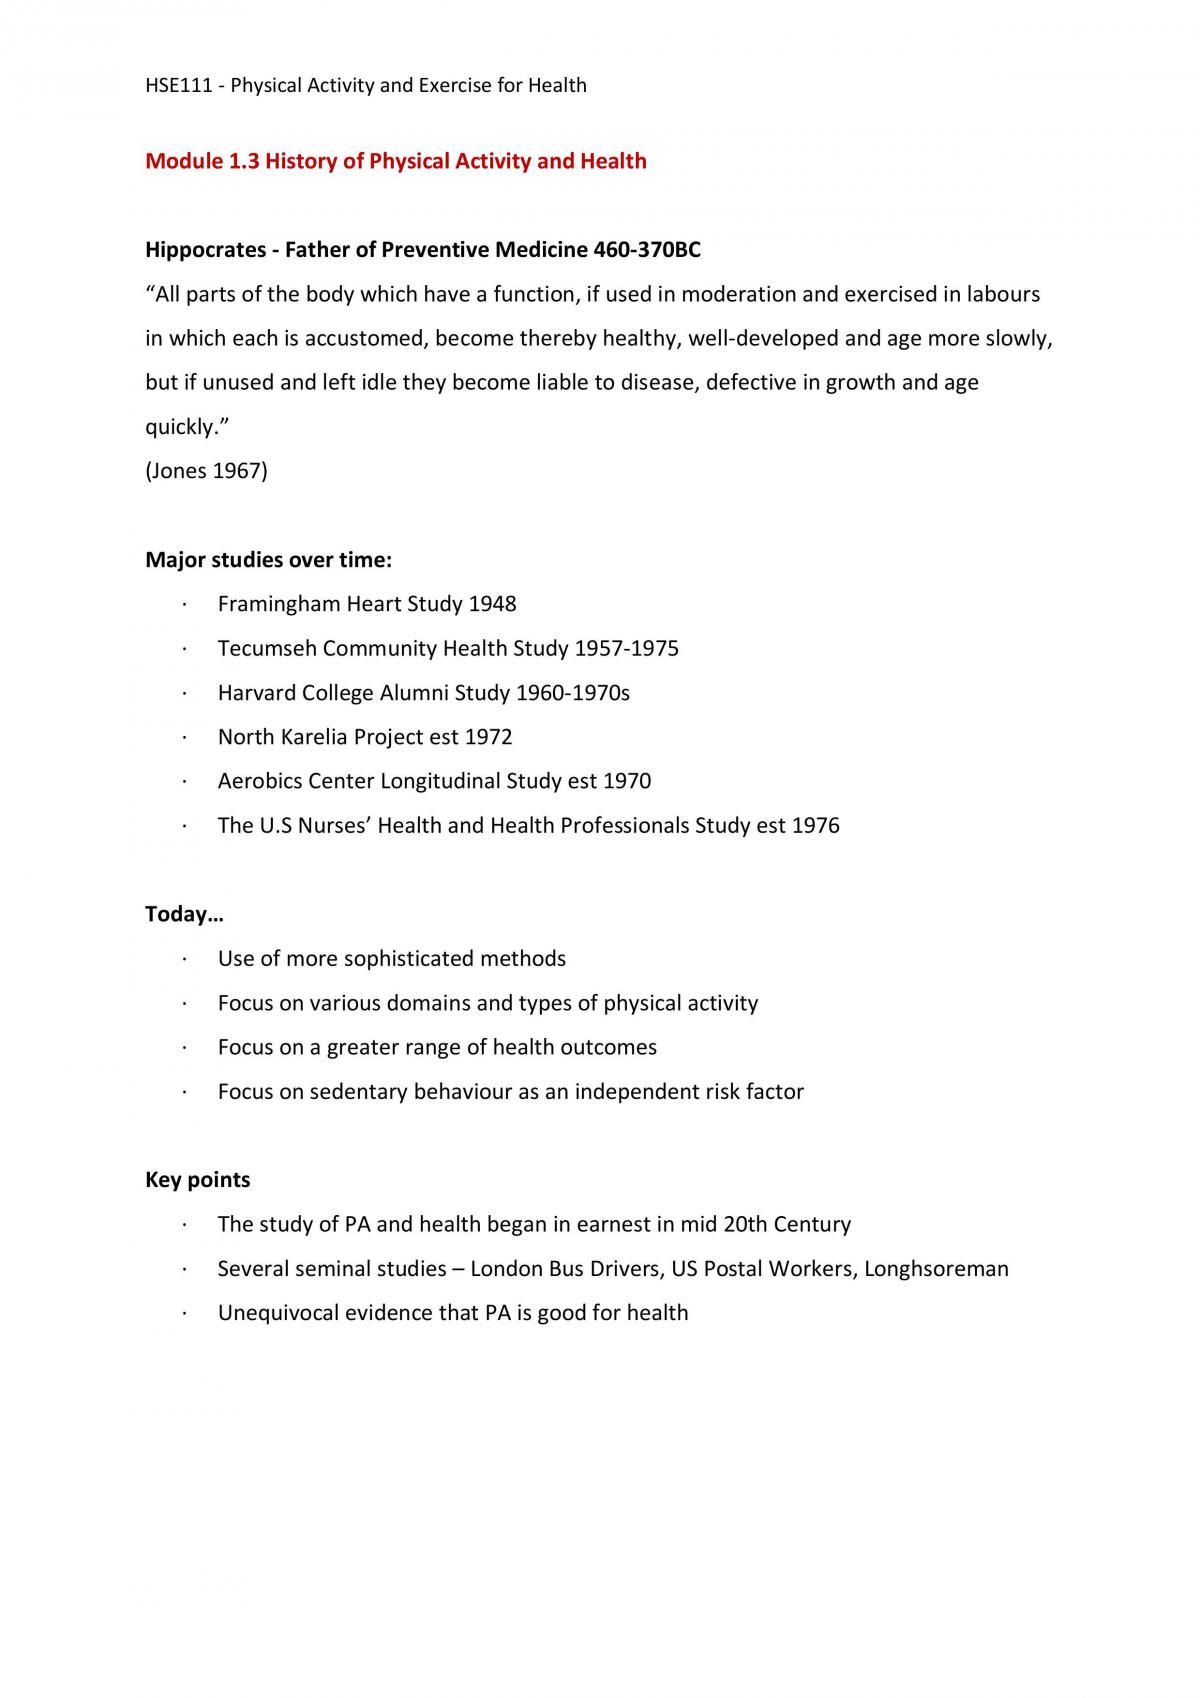 HSE111 Exam Notes - Page 6